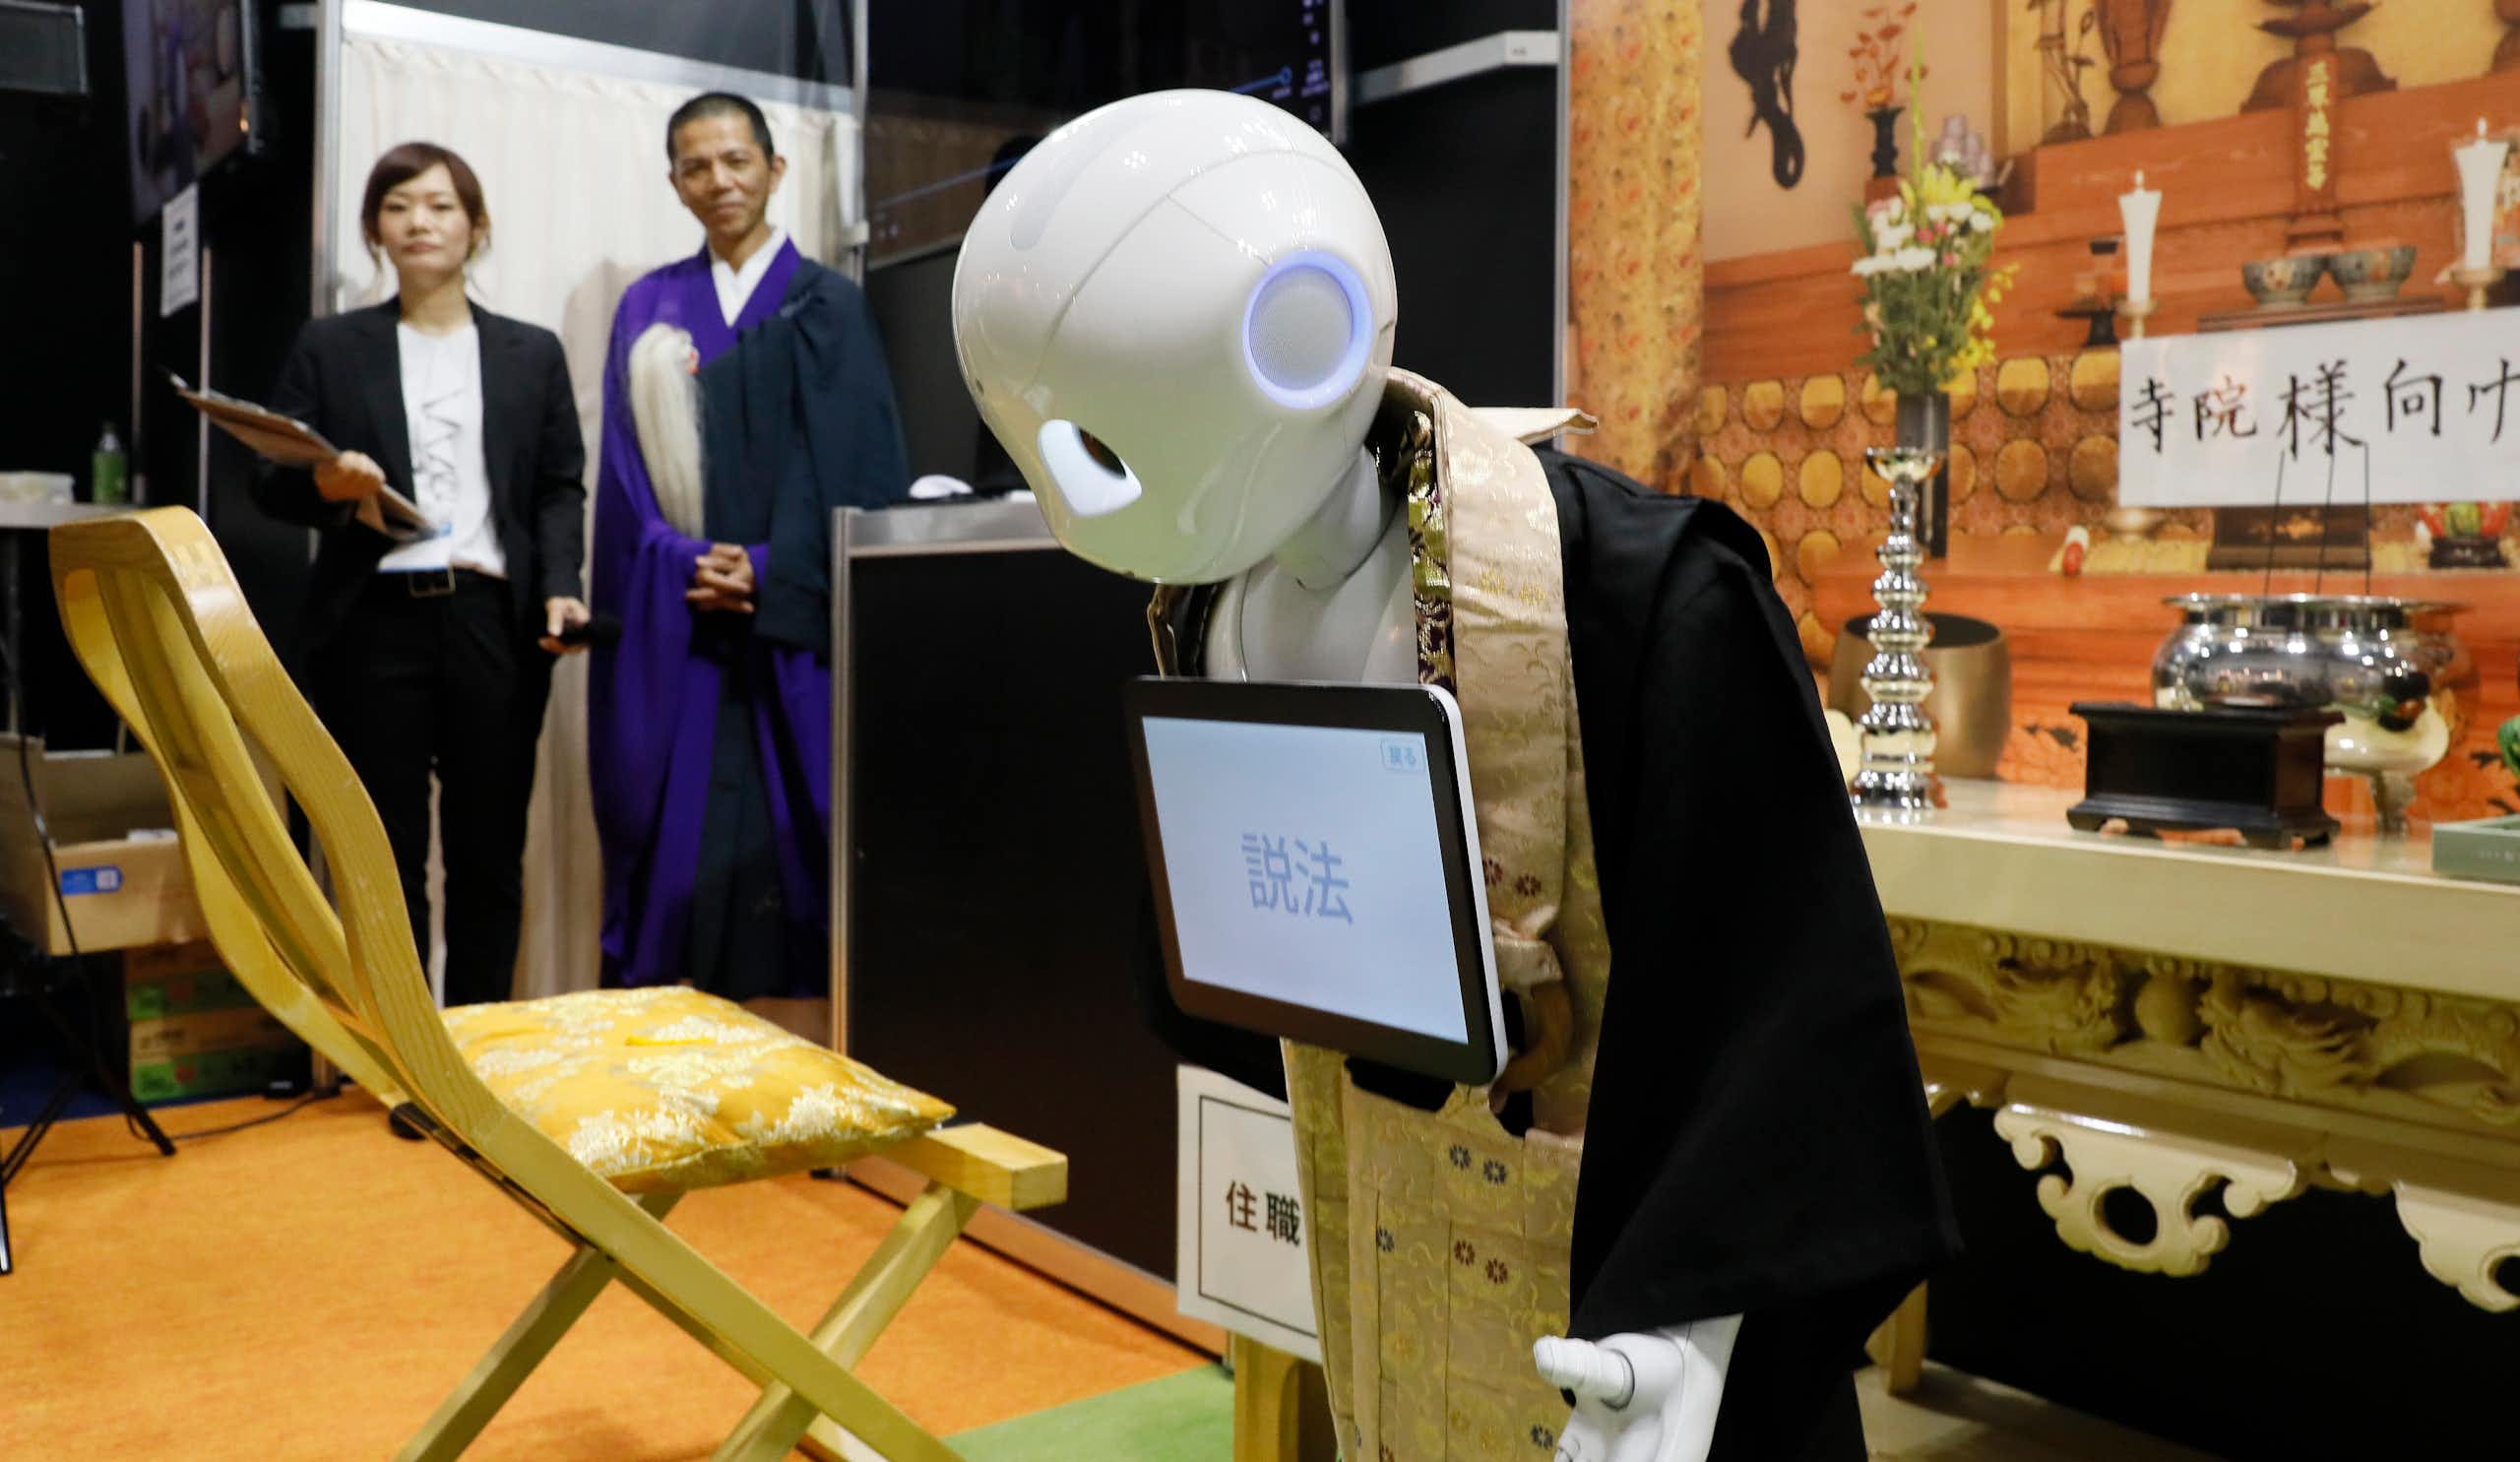 Robot dressed in Japanese gown bows